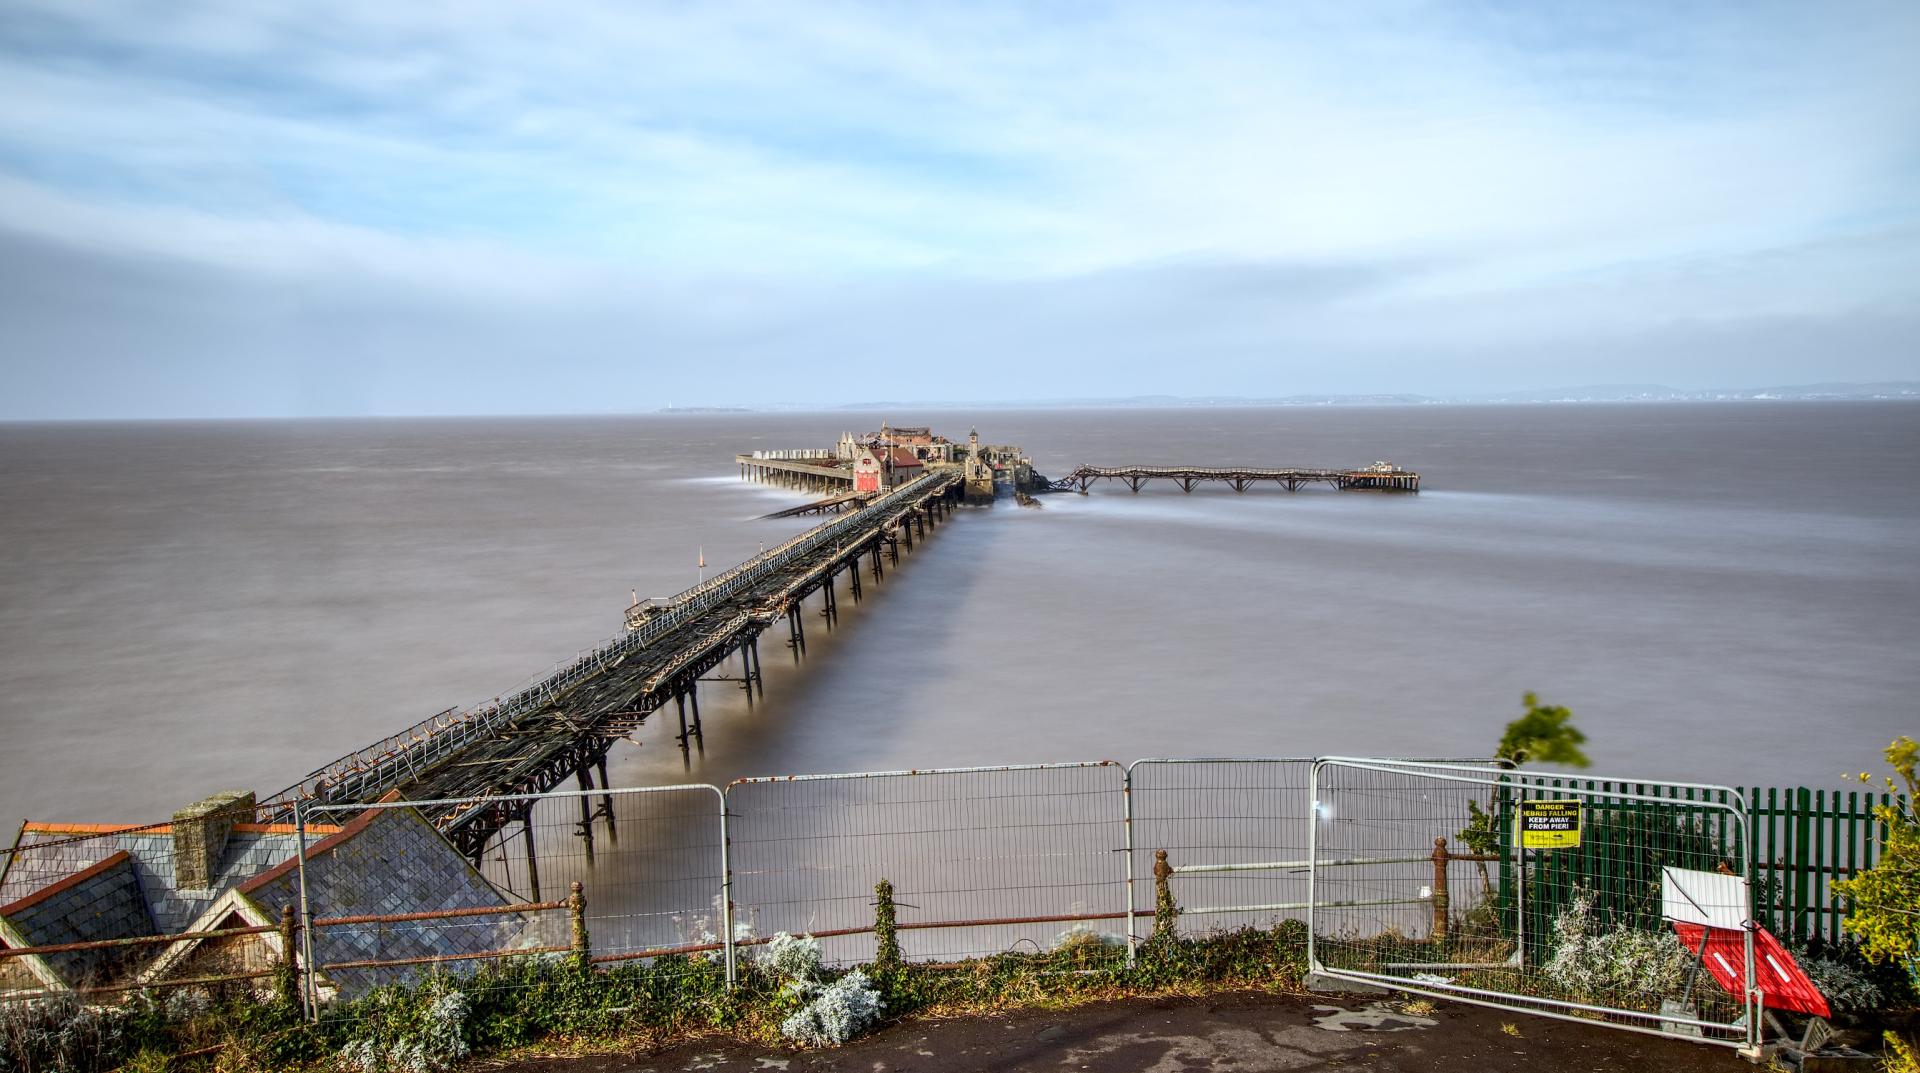 A photo taken of Birnbeck Pier from the road above looking out to sea